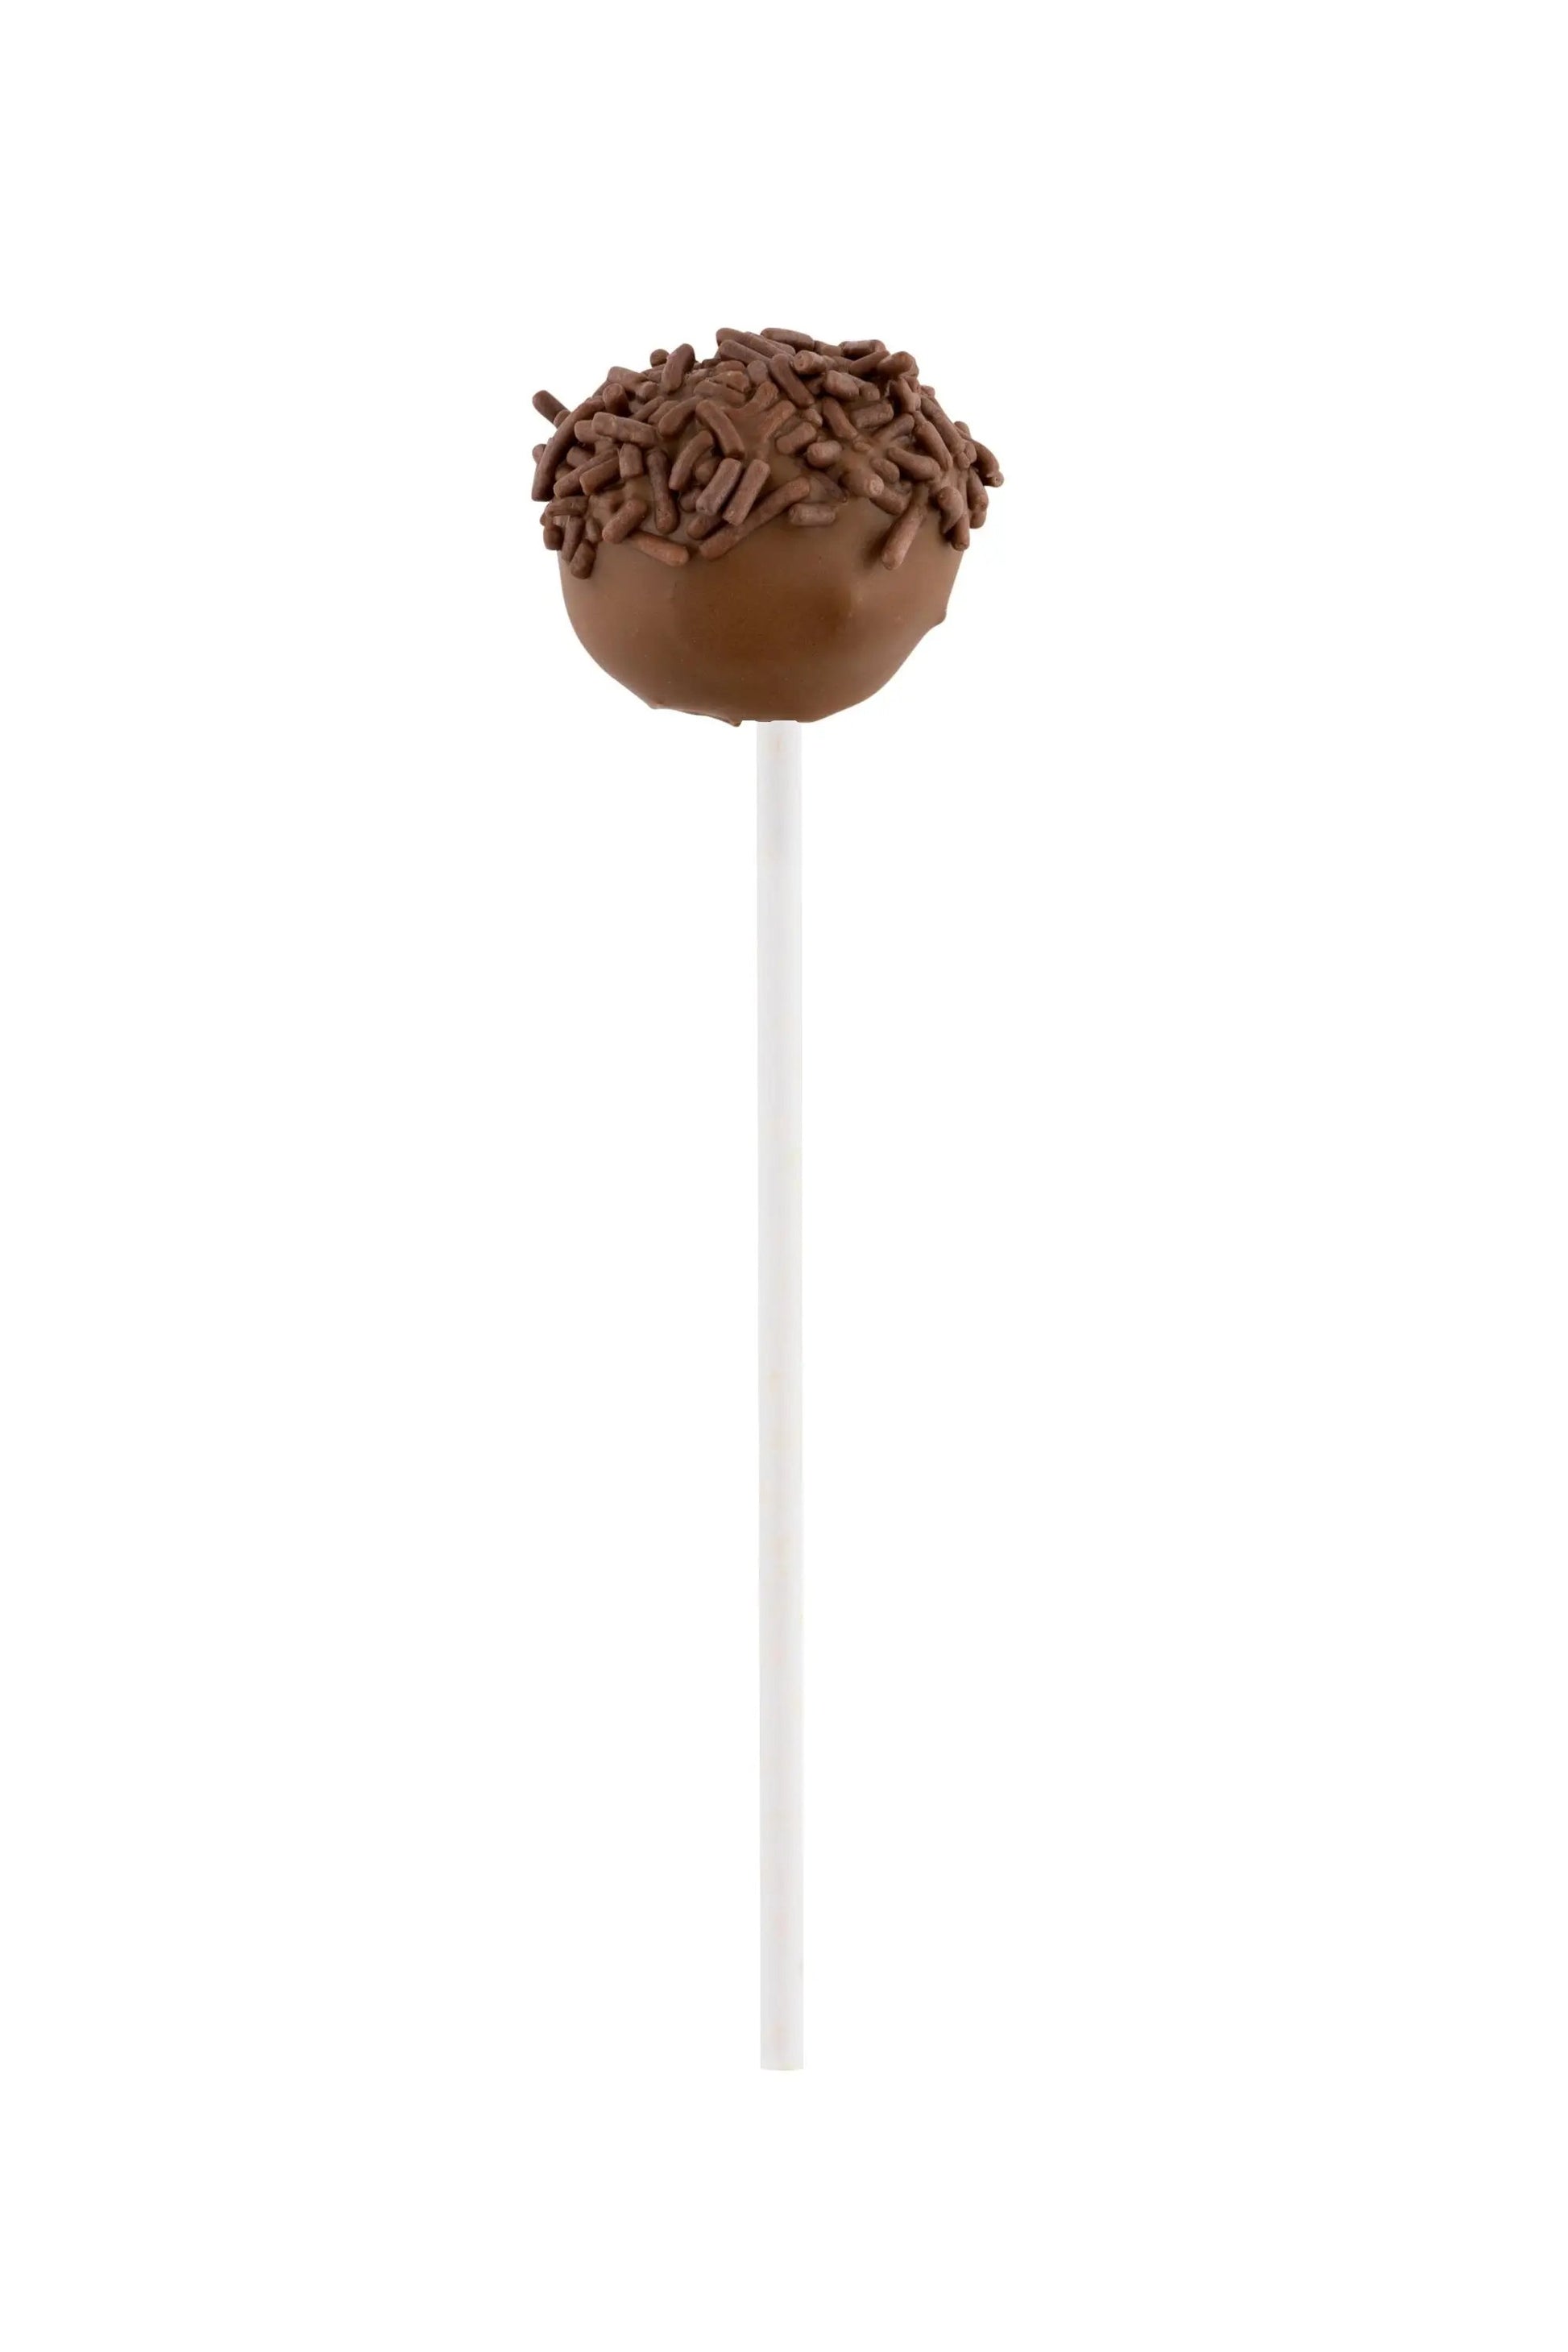 White Paper Coffee Stirrer and Lollipop Stick - Biodegradable - 6" x 5/32" - 100 count box - www.ecoware.ae                               